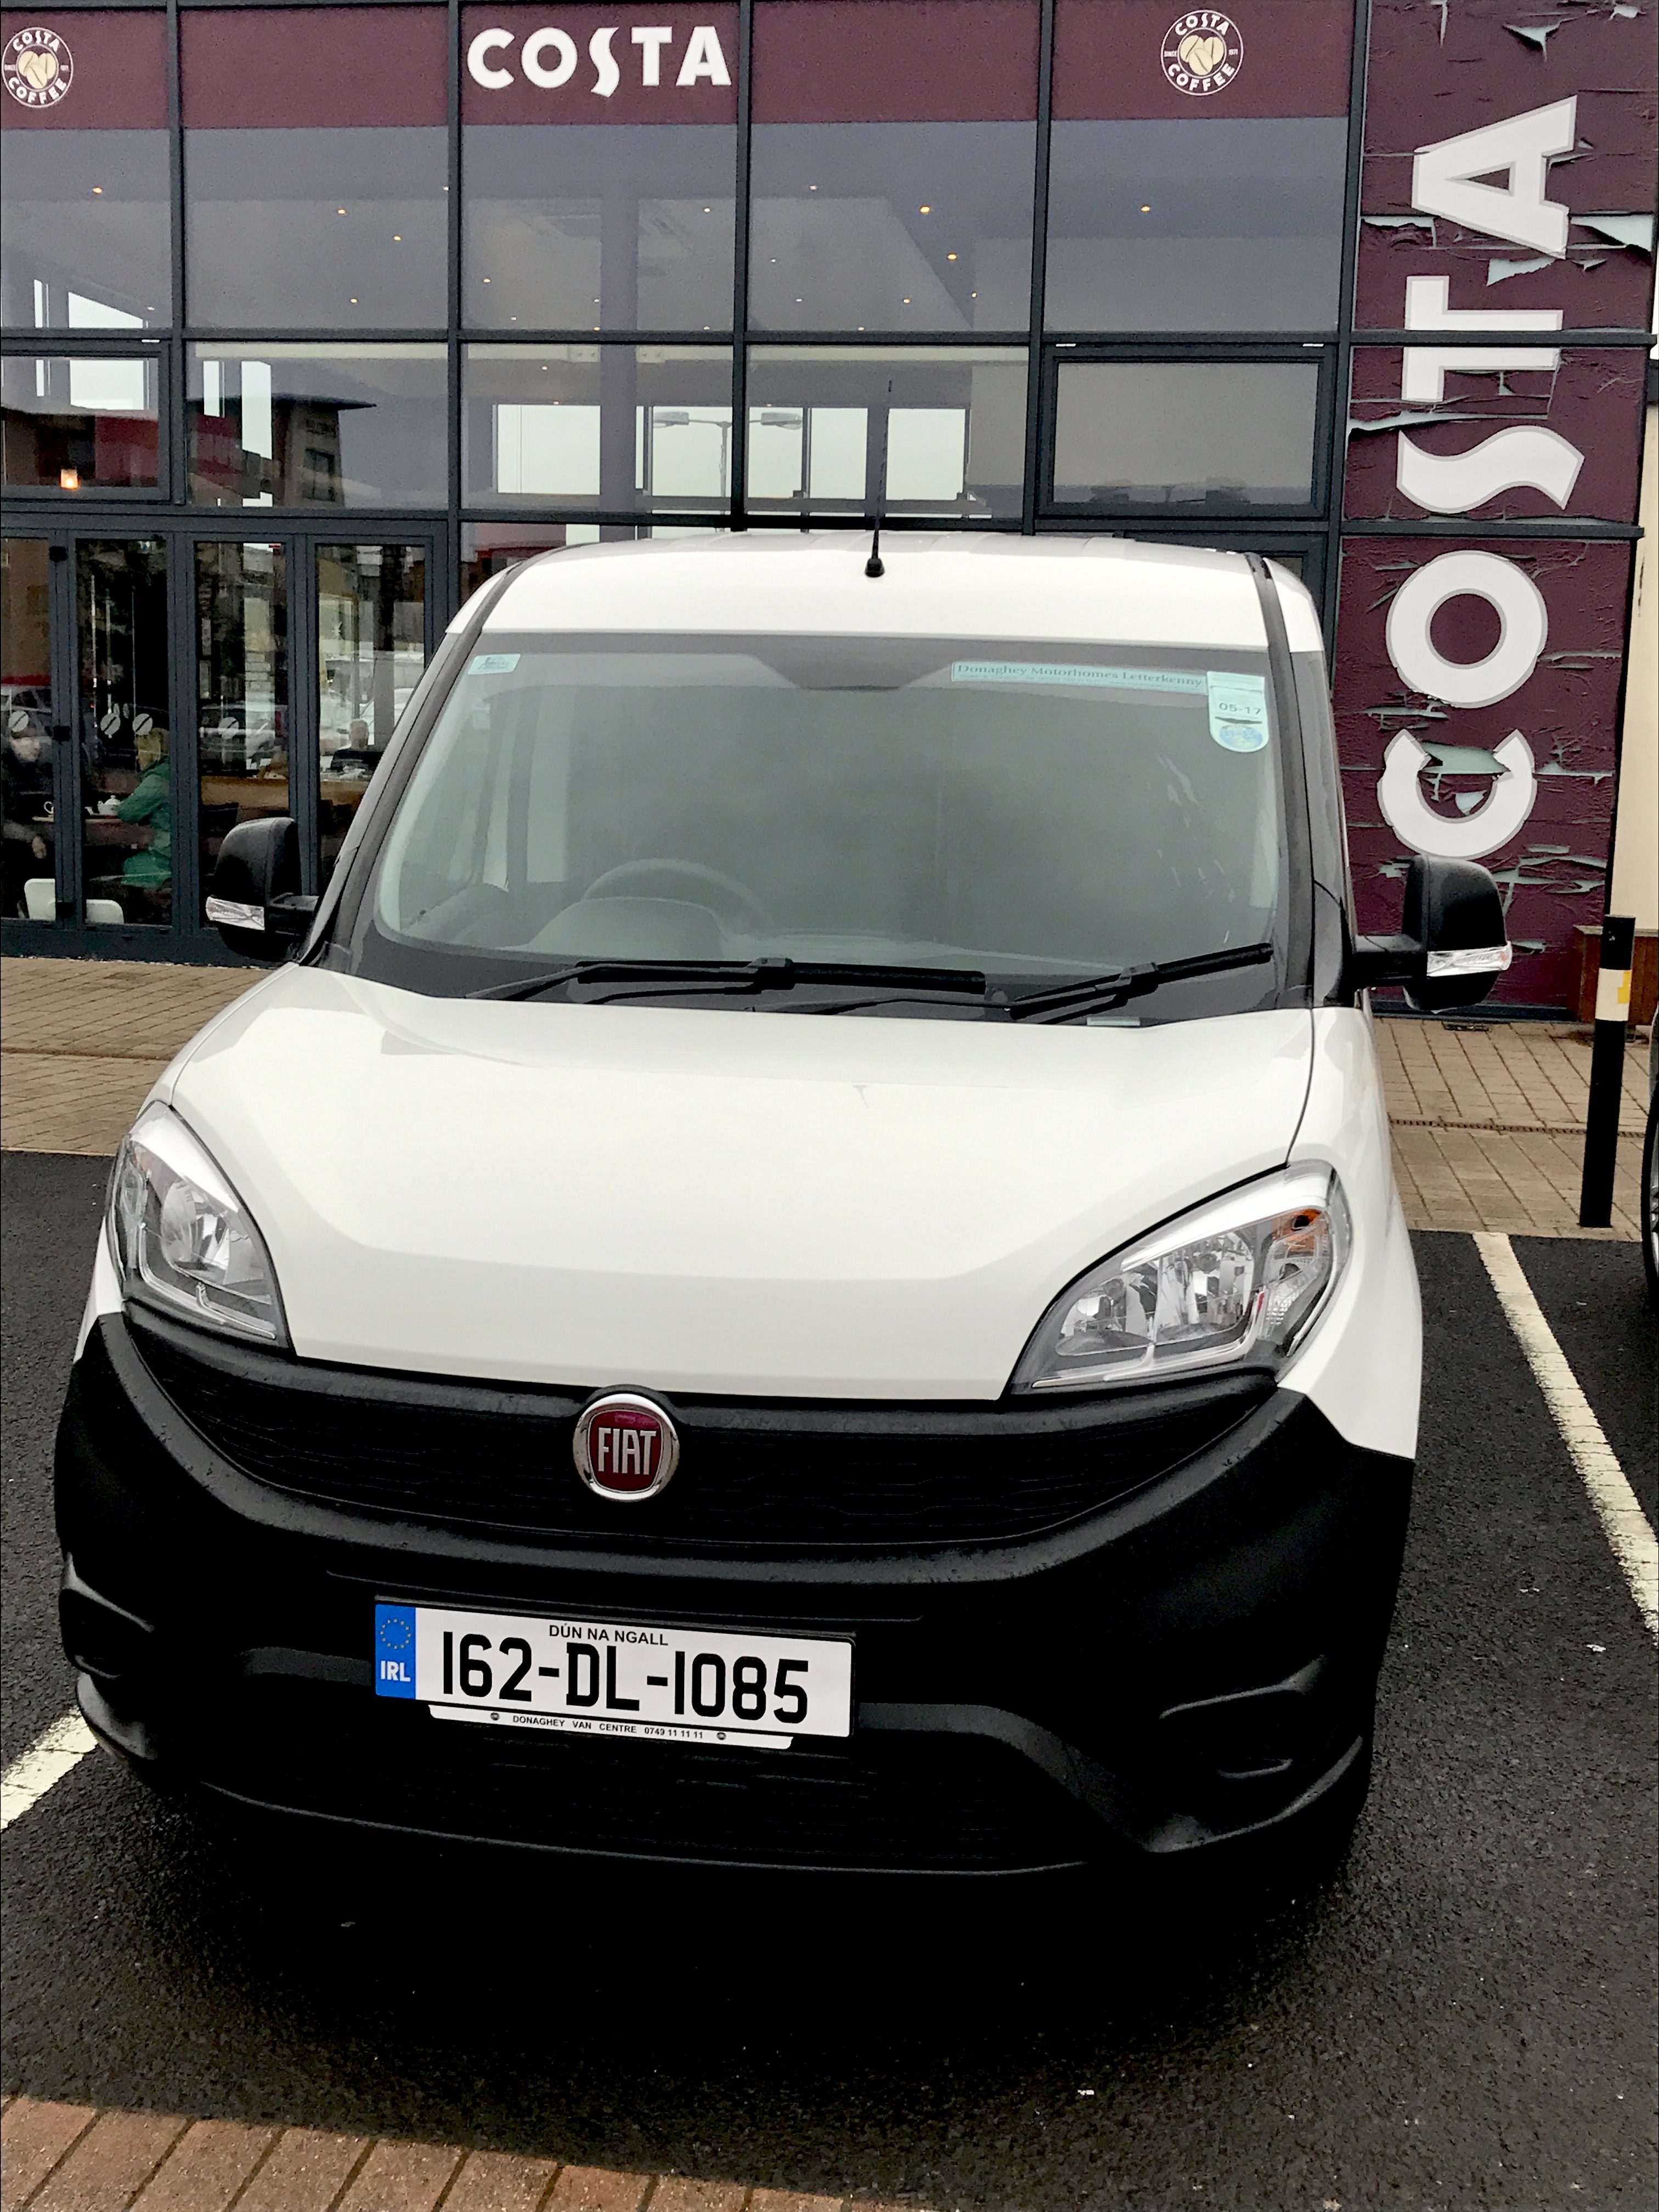 The Italian Job  My New Fiat  Doblo parked up as I enjoy the best of Italian Coffee at Costa in Letterkenny. Photo Brian McDaid